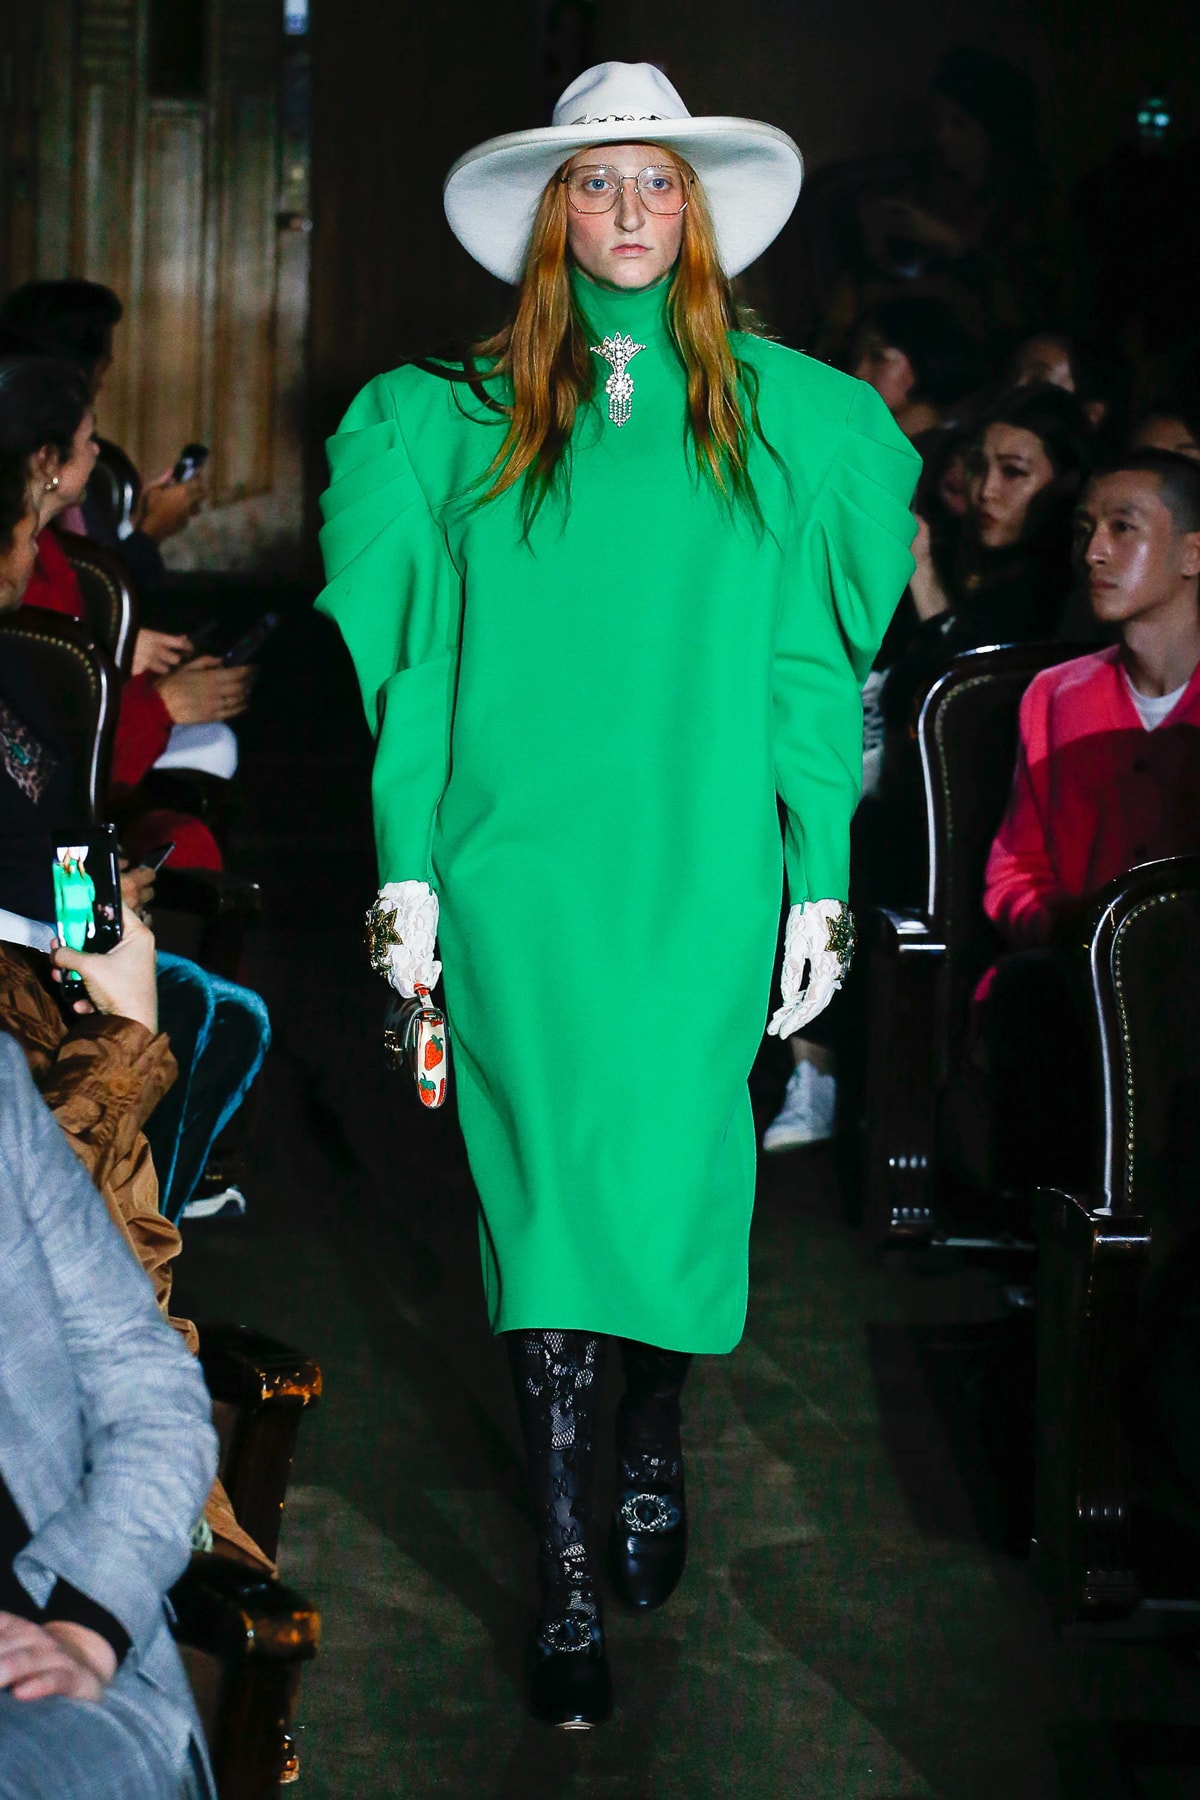 Gucci Alessandro Michelle Spring Summer 2019 Paris Fashion Week Show Collection Dress Green Hat White